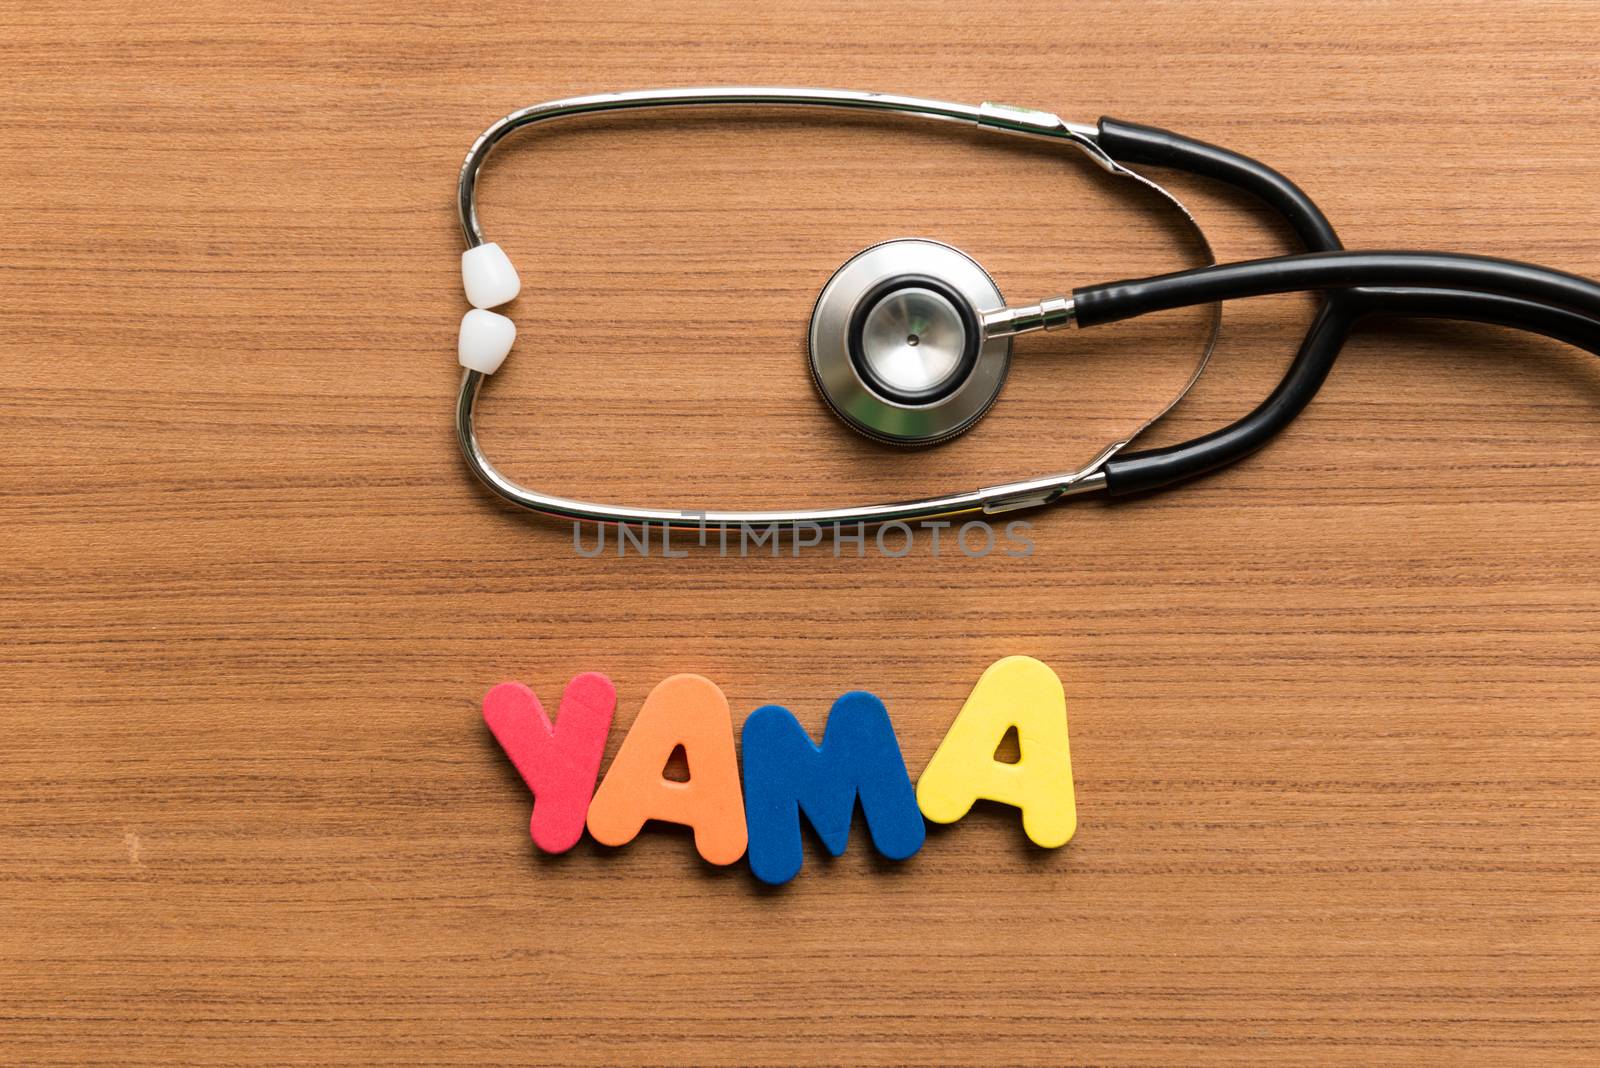 yama colorful word with stethoscope by sohel.parvez@hotmail.com